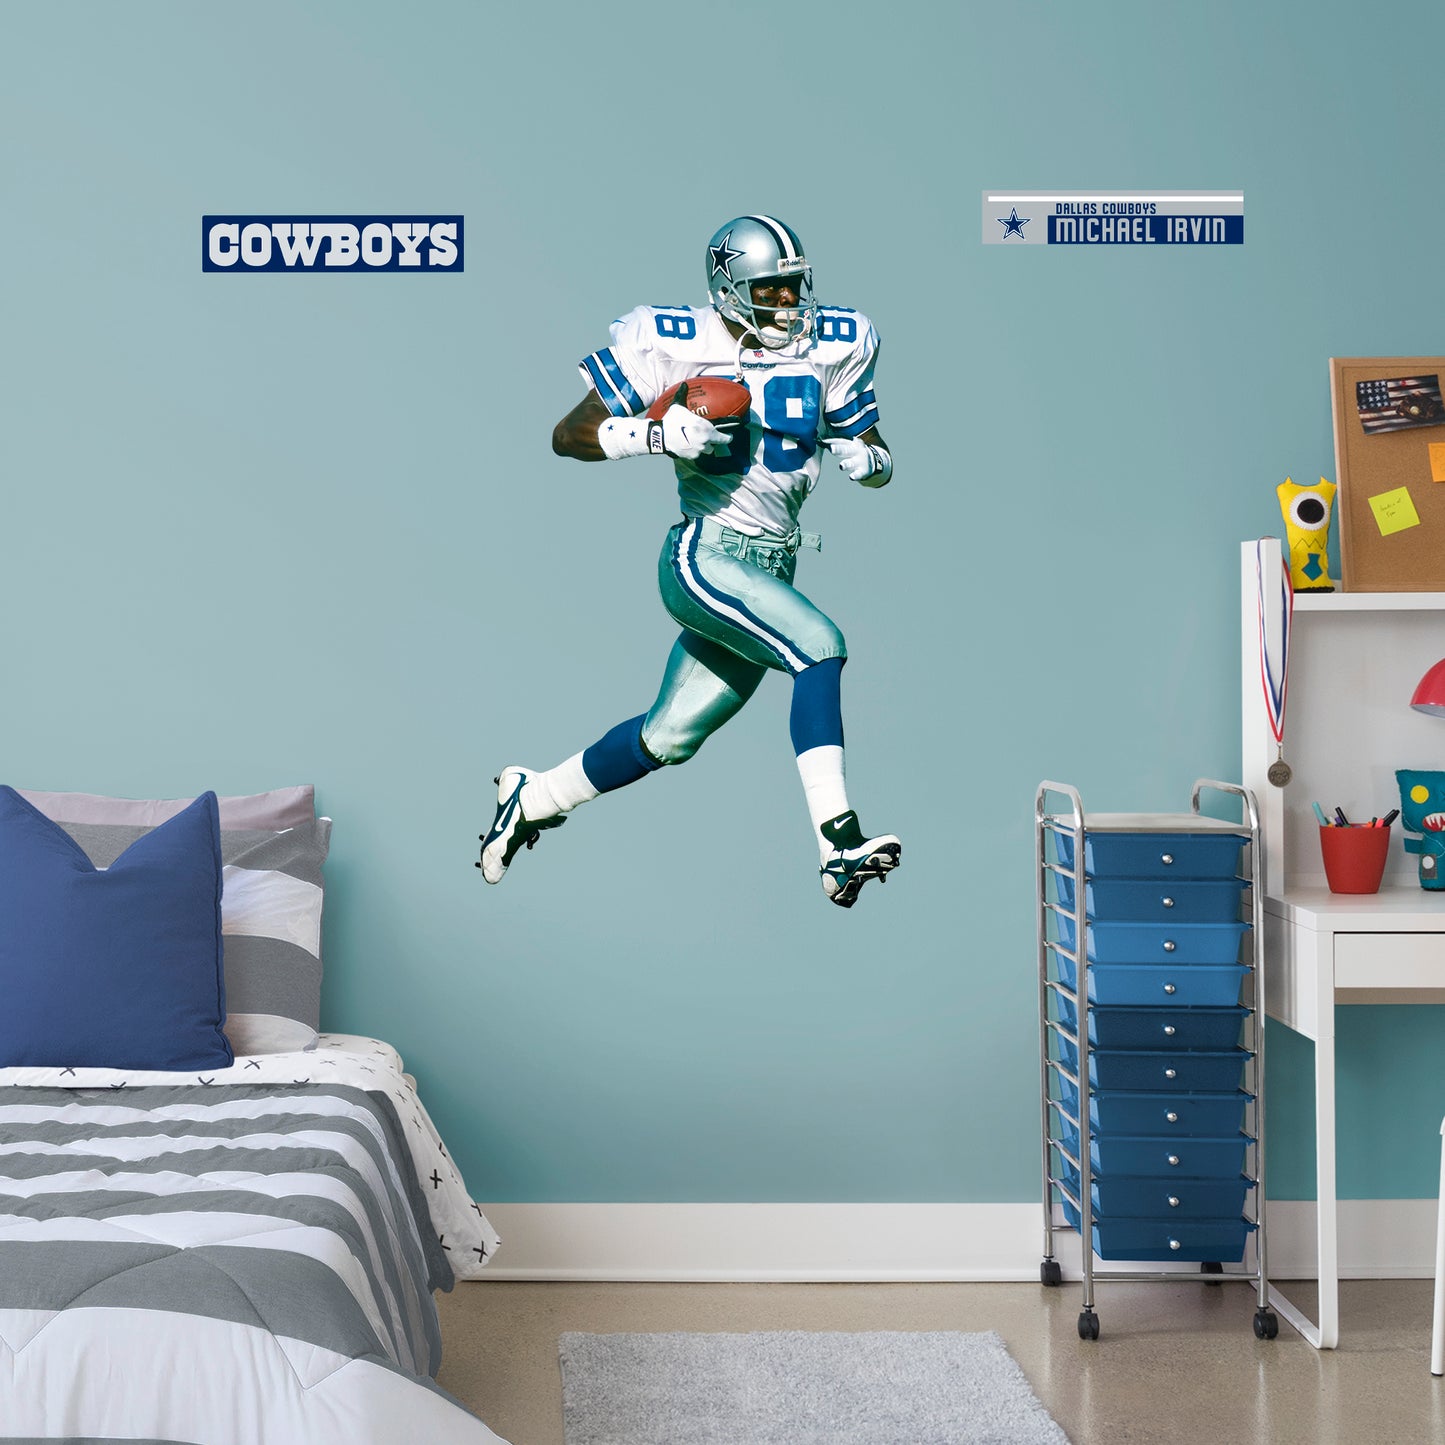 Giant Athlete + 2 Decals You can show off your love for NFL legend and Hall of Famer Michael Irvin with this high-quality wall decal. Wearing his iconic number 88 Dallas Cowboys jersey, this decal shows off The Playmaker leaving defenders in the dust! Luckily, you won't have to worry about trying to tackle Irvin yourself - this wall decal can be easily applied and removed from almost any surface. How 'bout them Cowboys?!